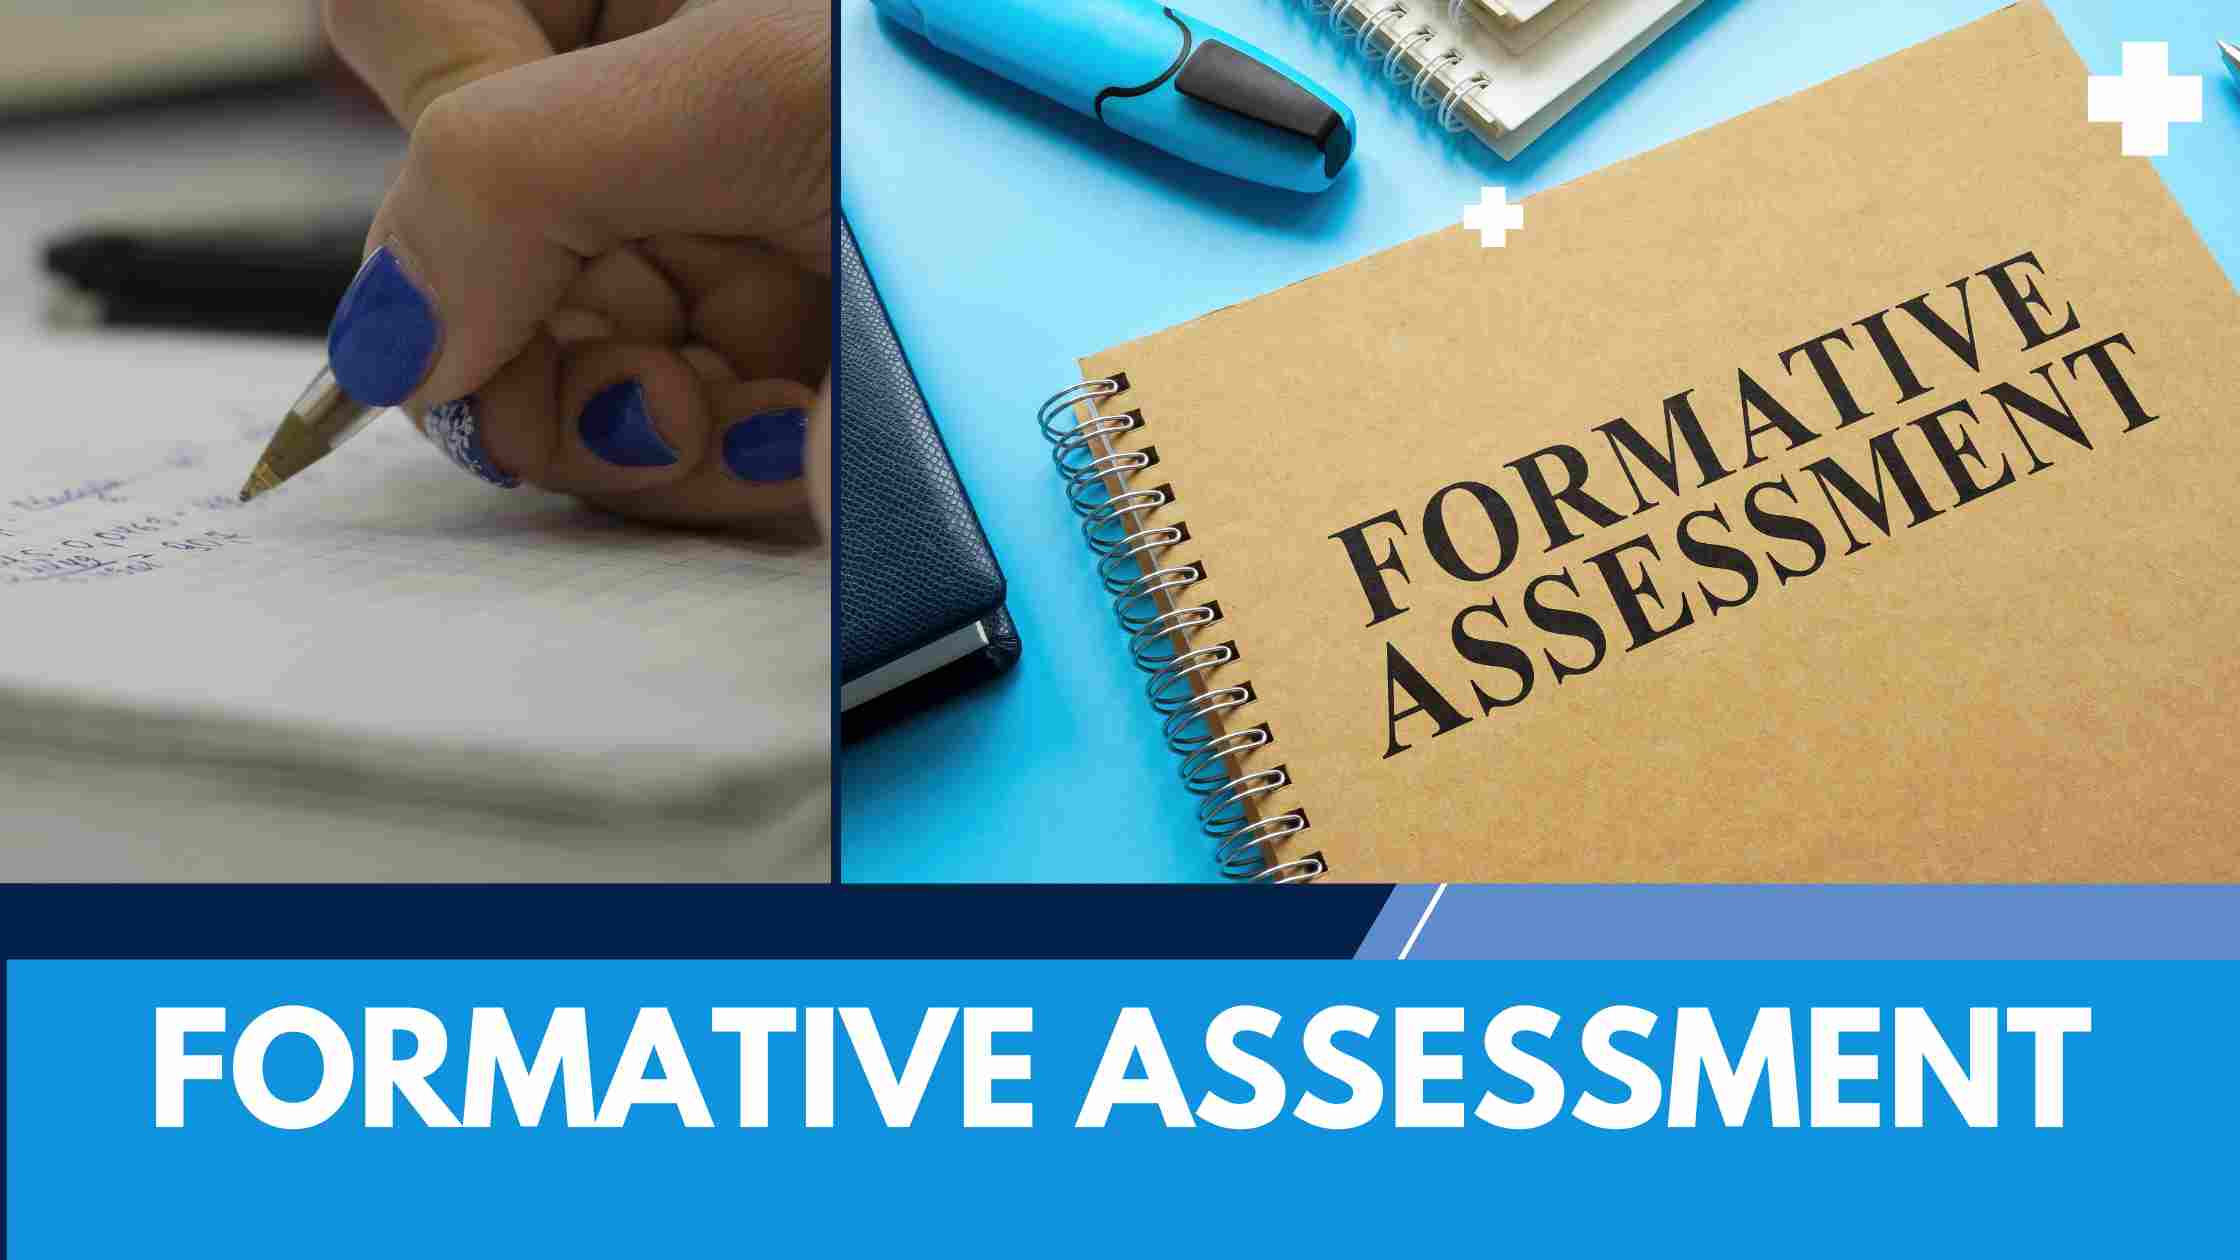 FORMATIVE ASSESSMENT by Zone of Education